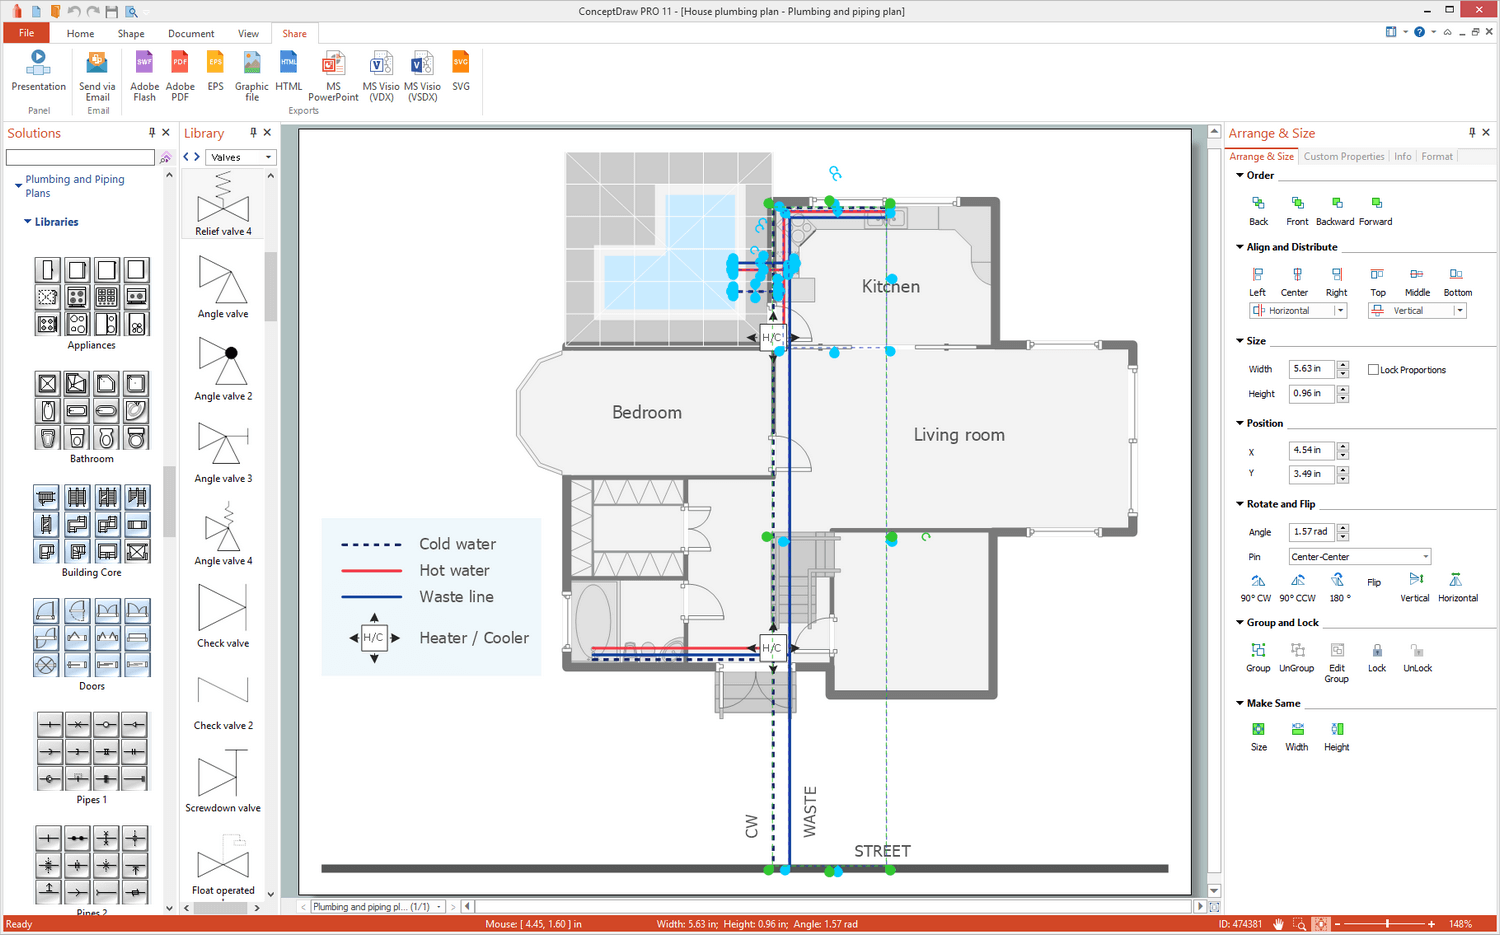 Plumbing and Piping Plans Solution for Microsoft Windows